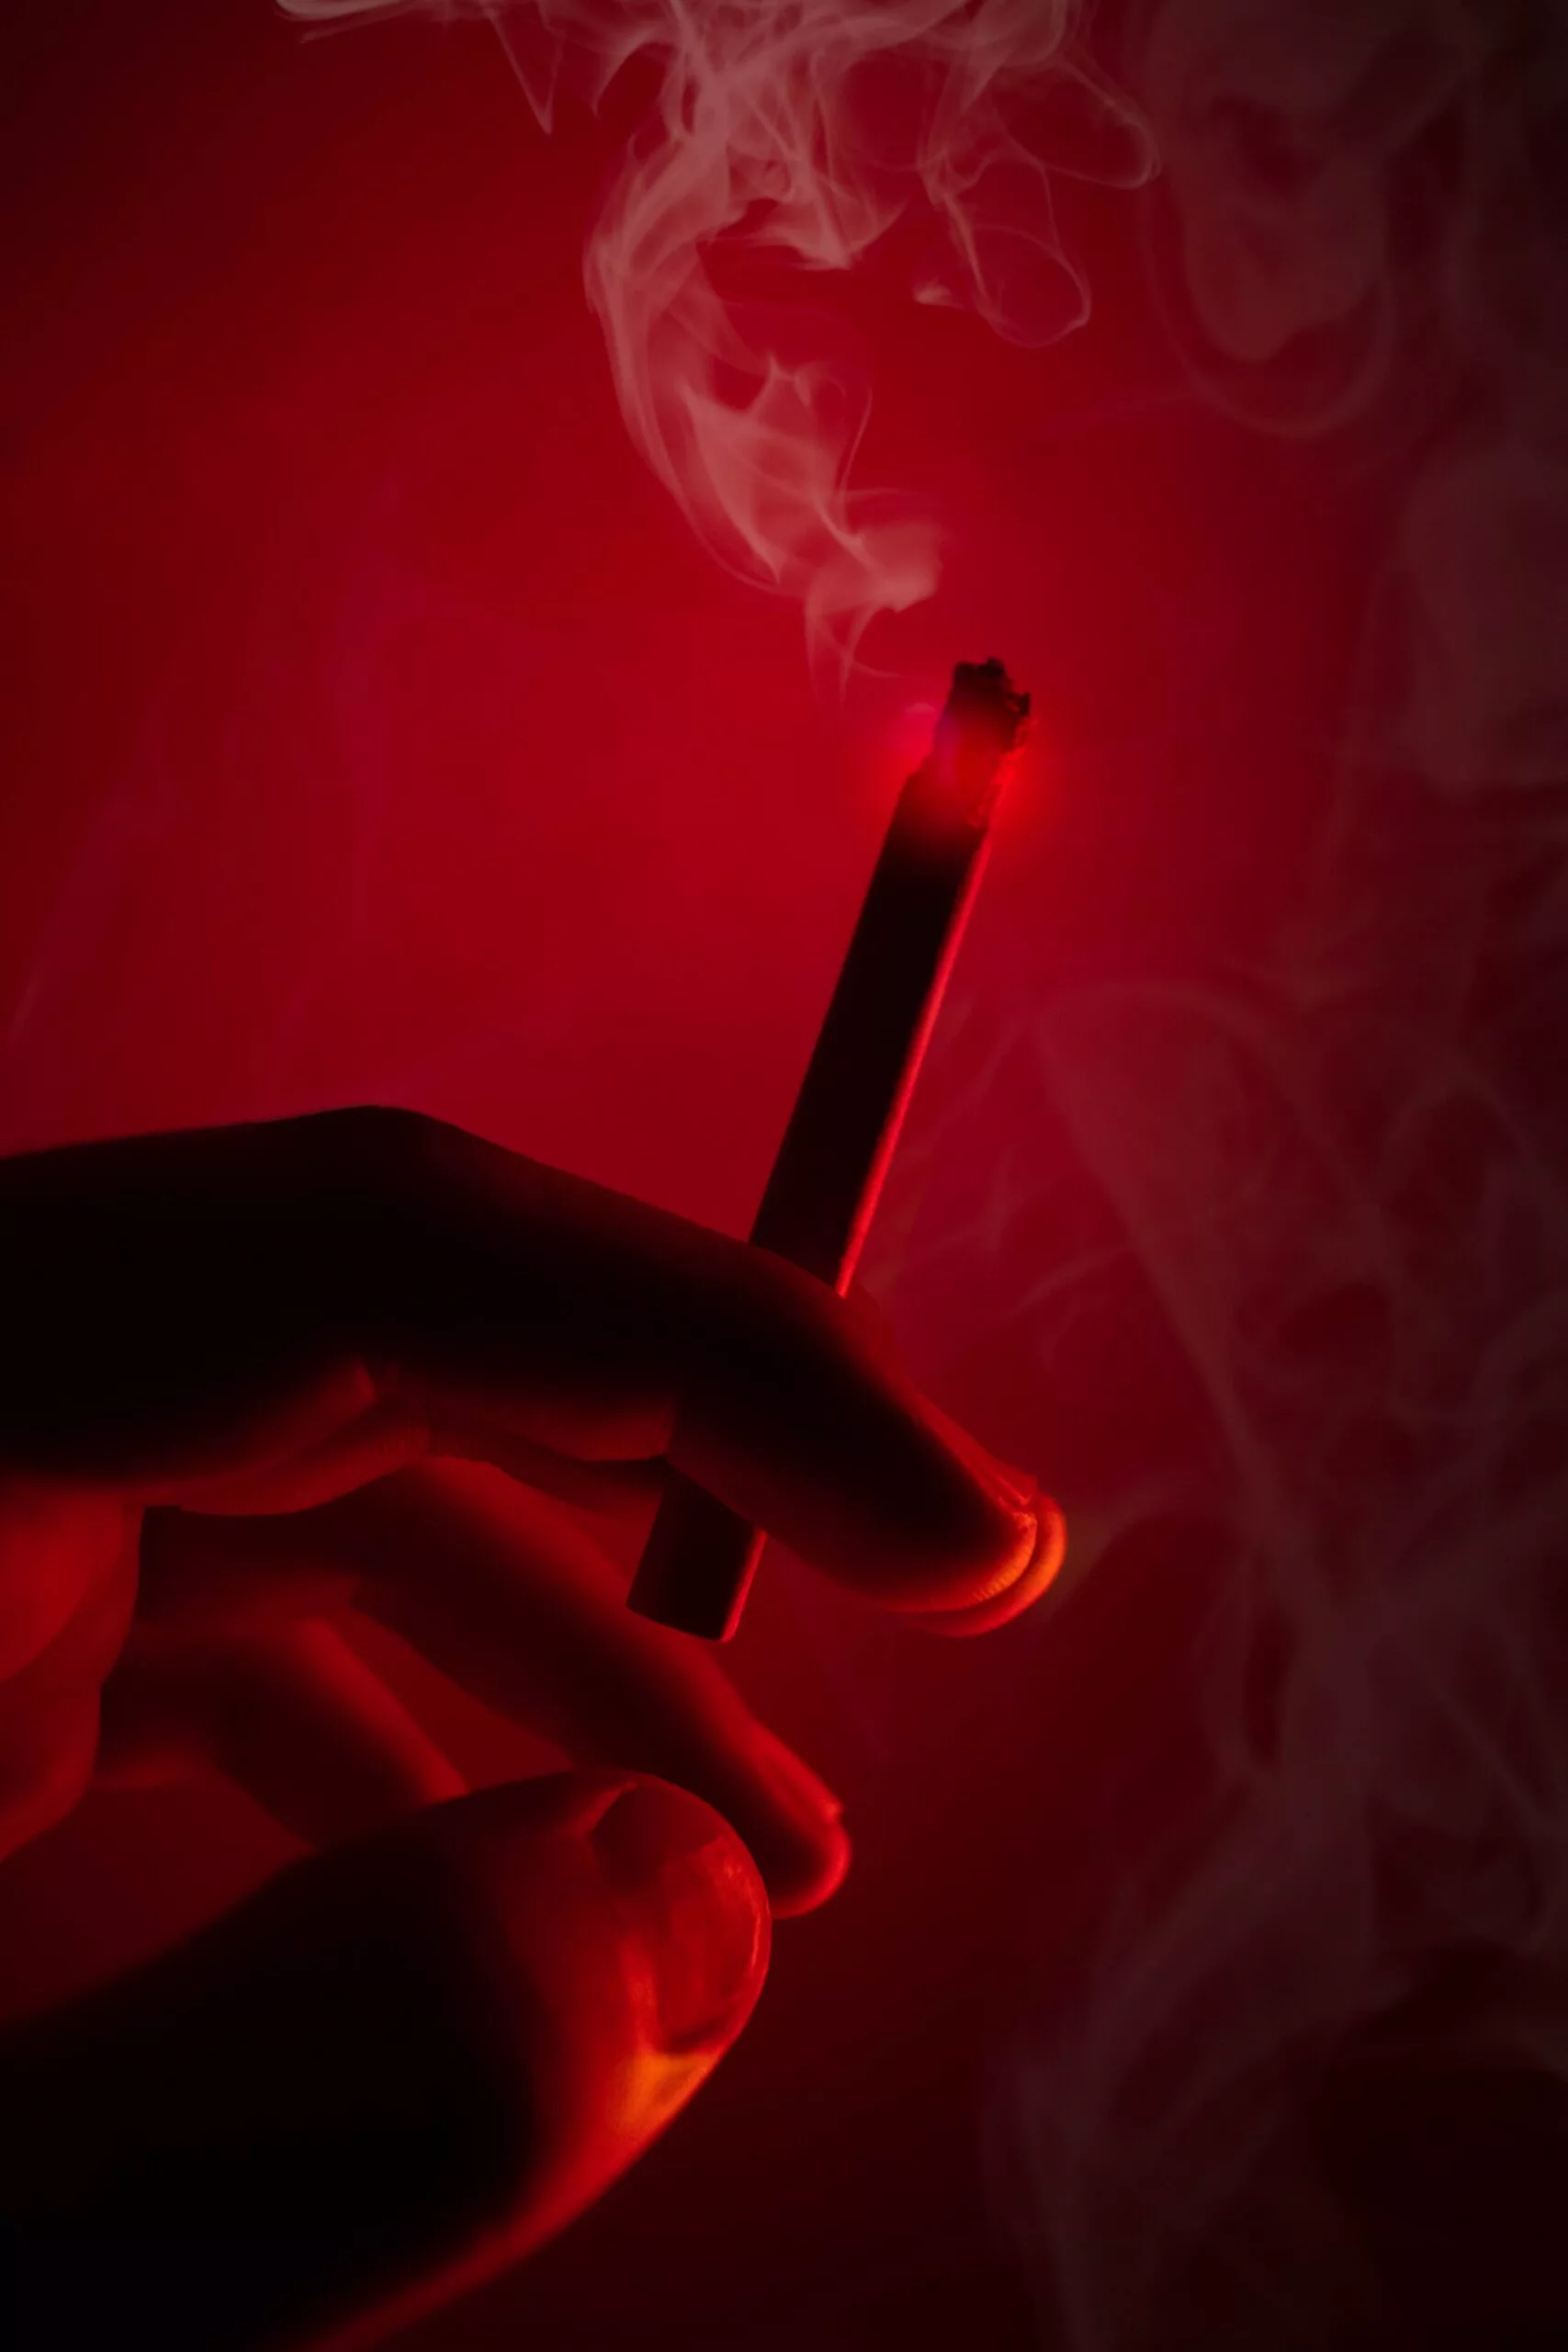 First hand smoke causes mutation in cardiovascular cells